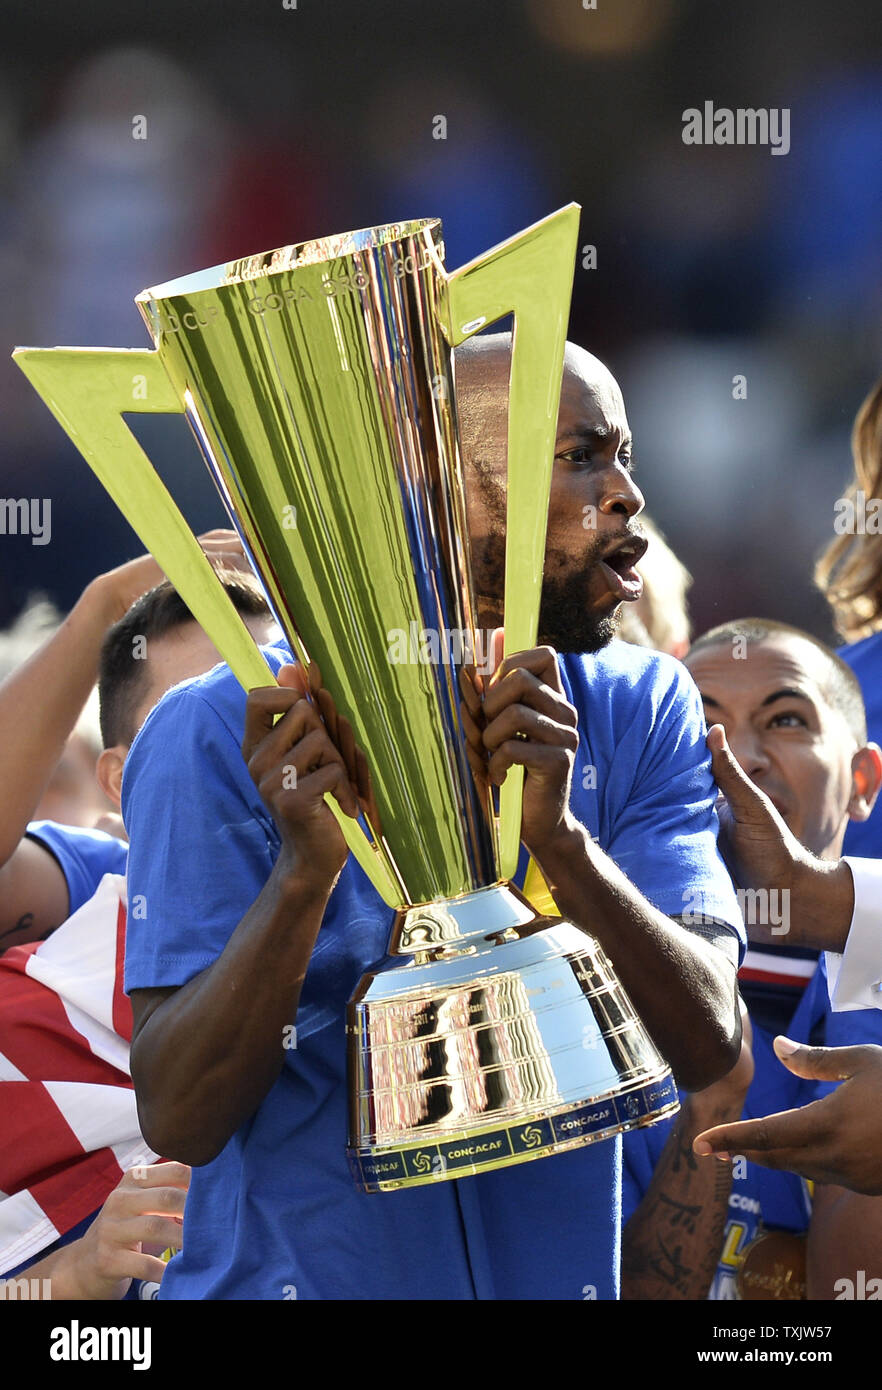 United States team captain DaMarcus Beasley holds the Gold Cup after defeating Panama in the 2013 CONCACAF Gold Cup Final at Soldier Field in Chicago on July 28, 2013. The United States won 1-0.     UPI/Brian Kersey Stock Photo